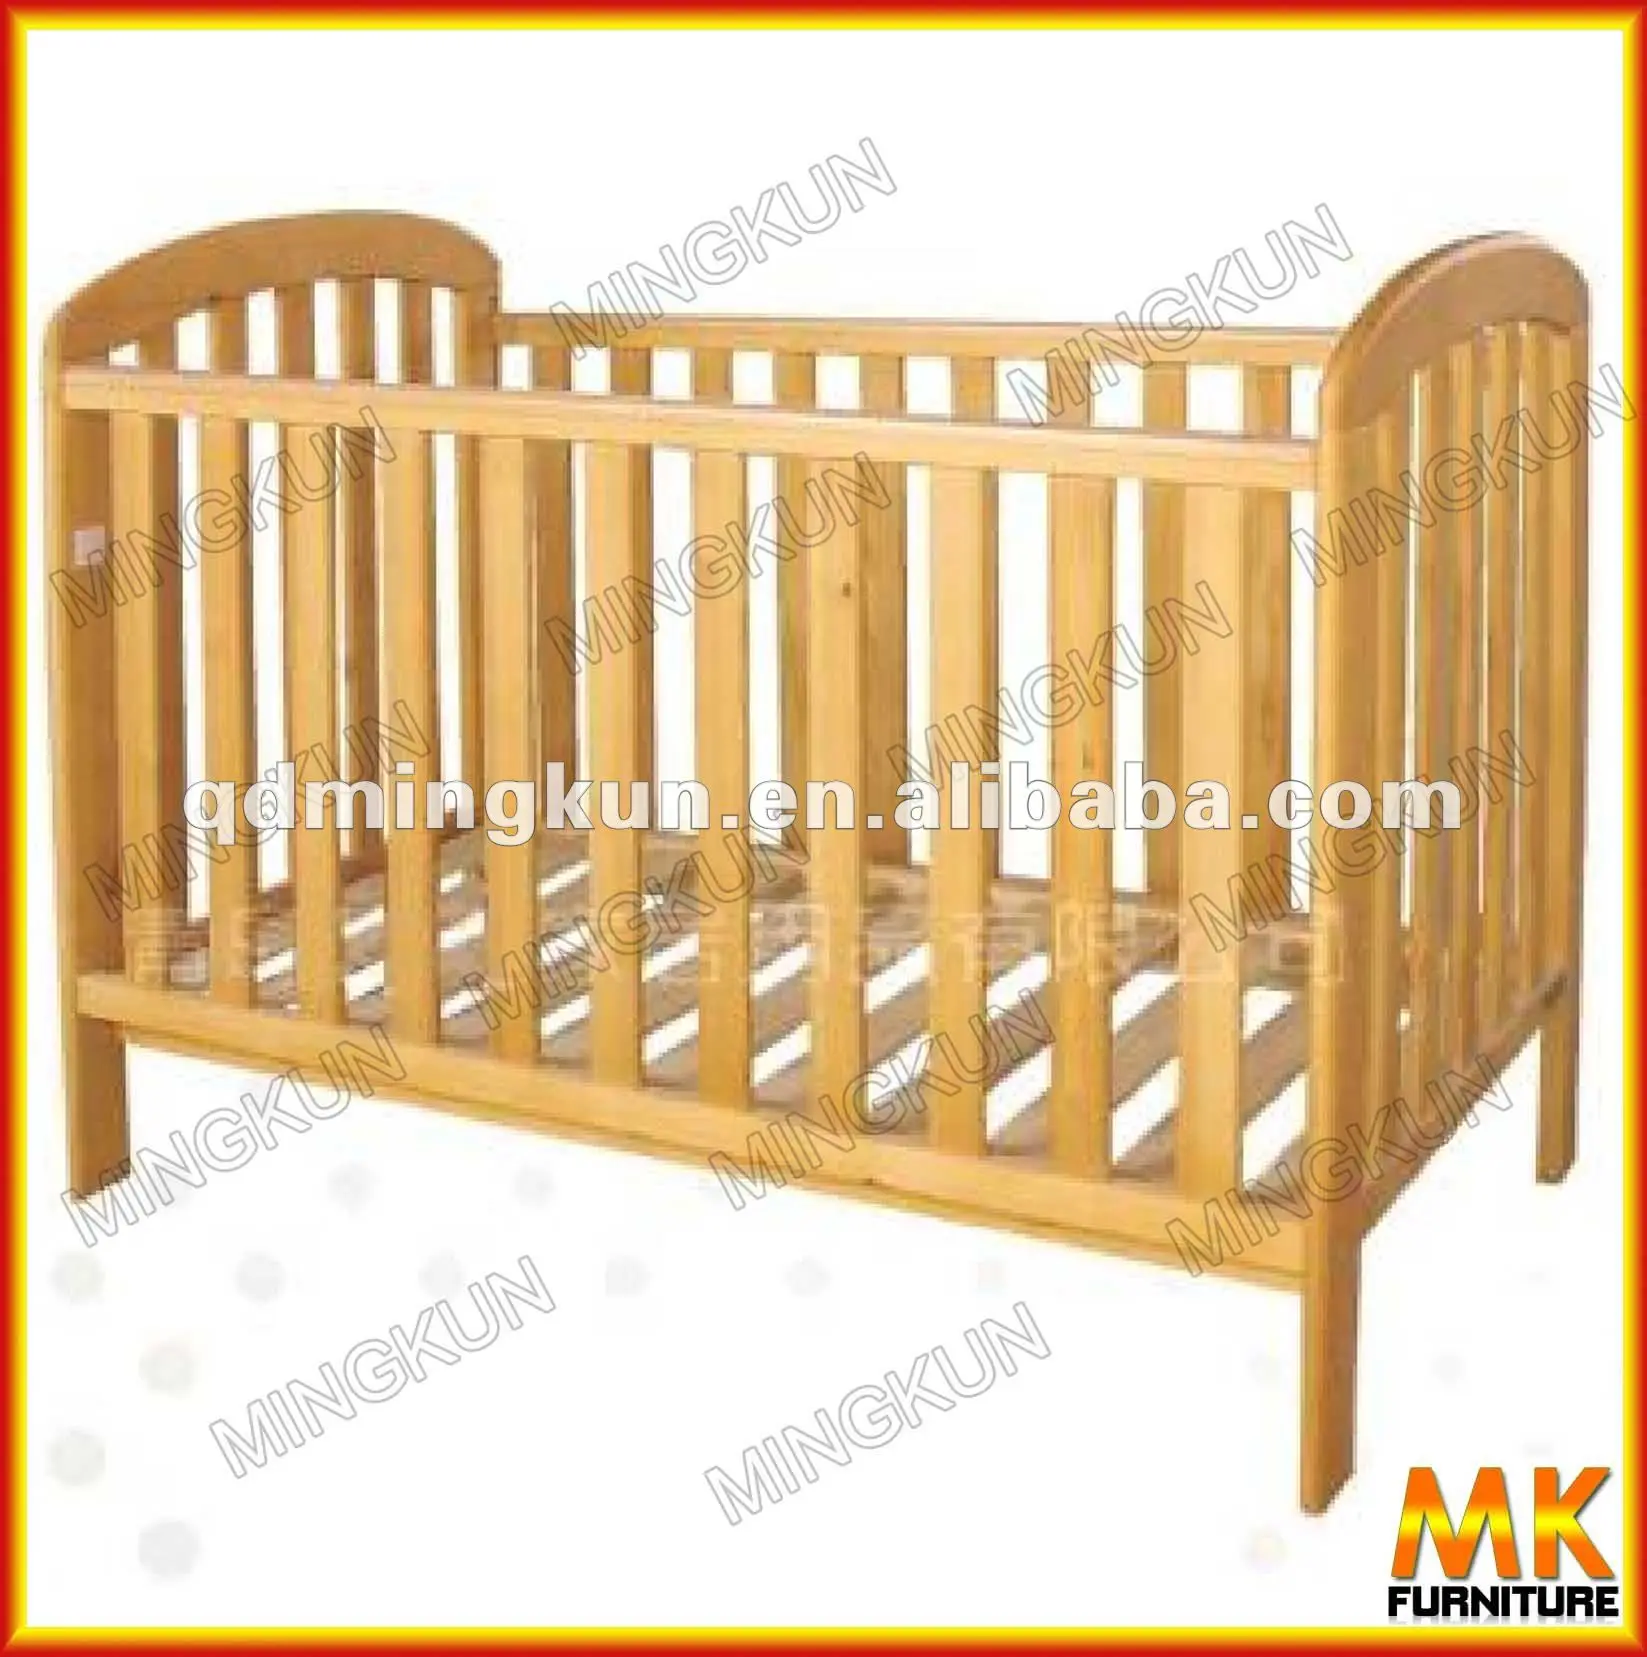 small wooden cradle